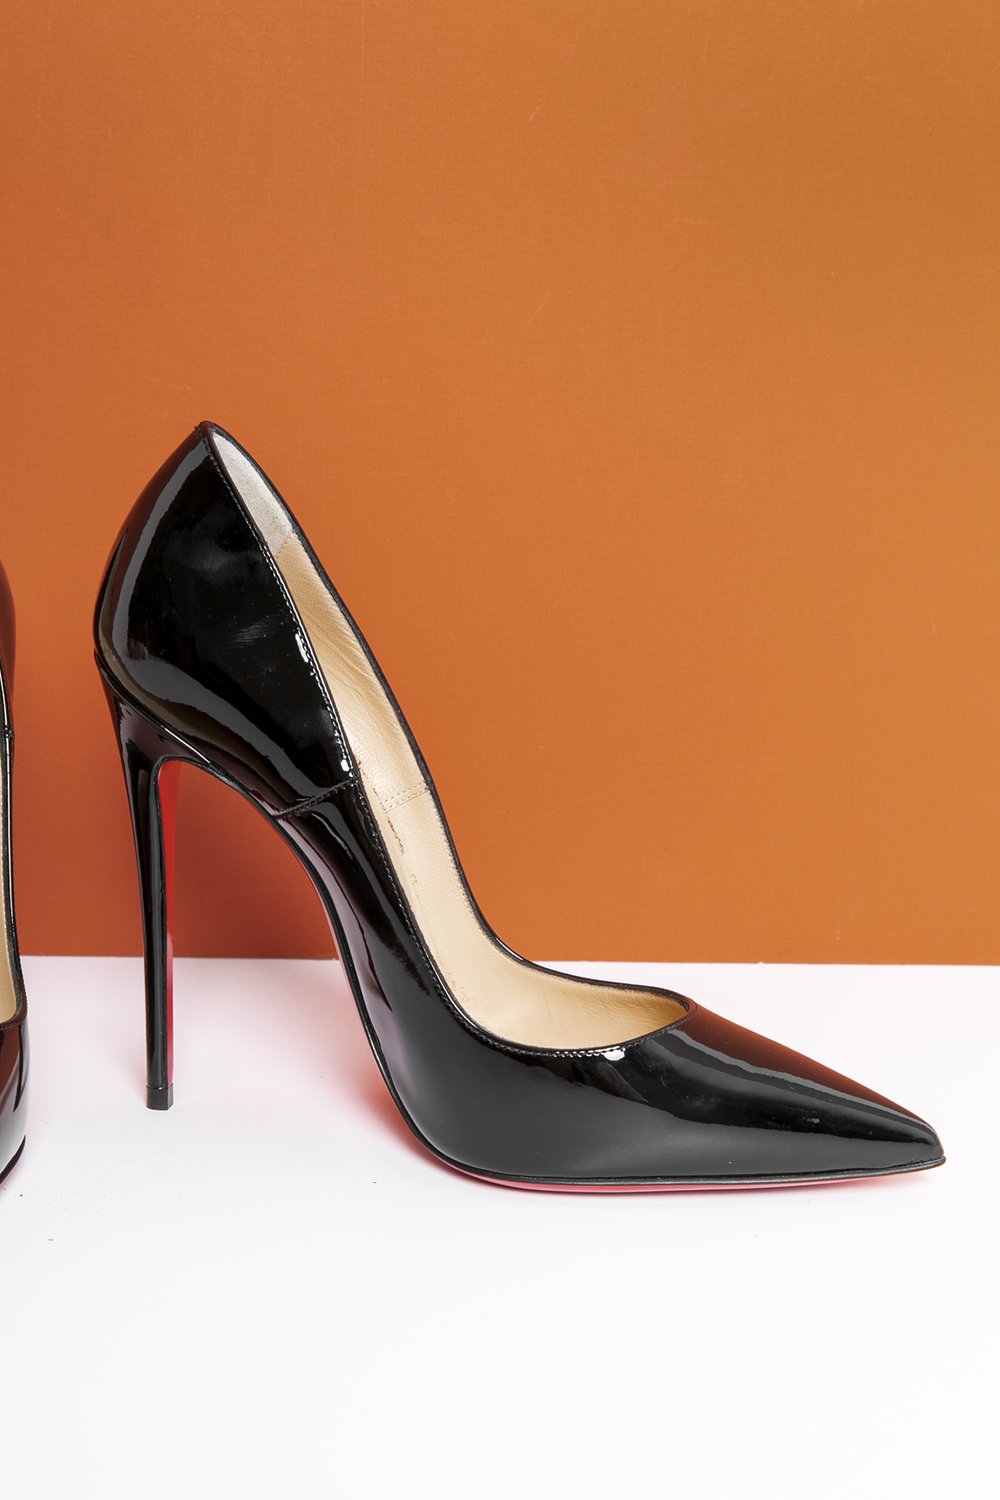 Christian Louboutin So Kate Patent Leather Heels for Women for